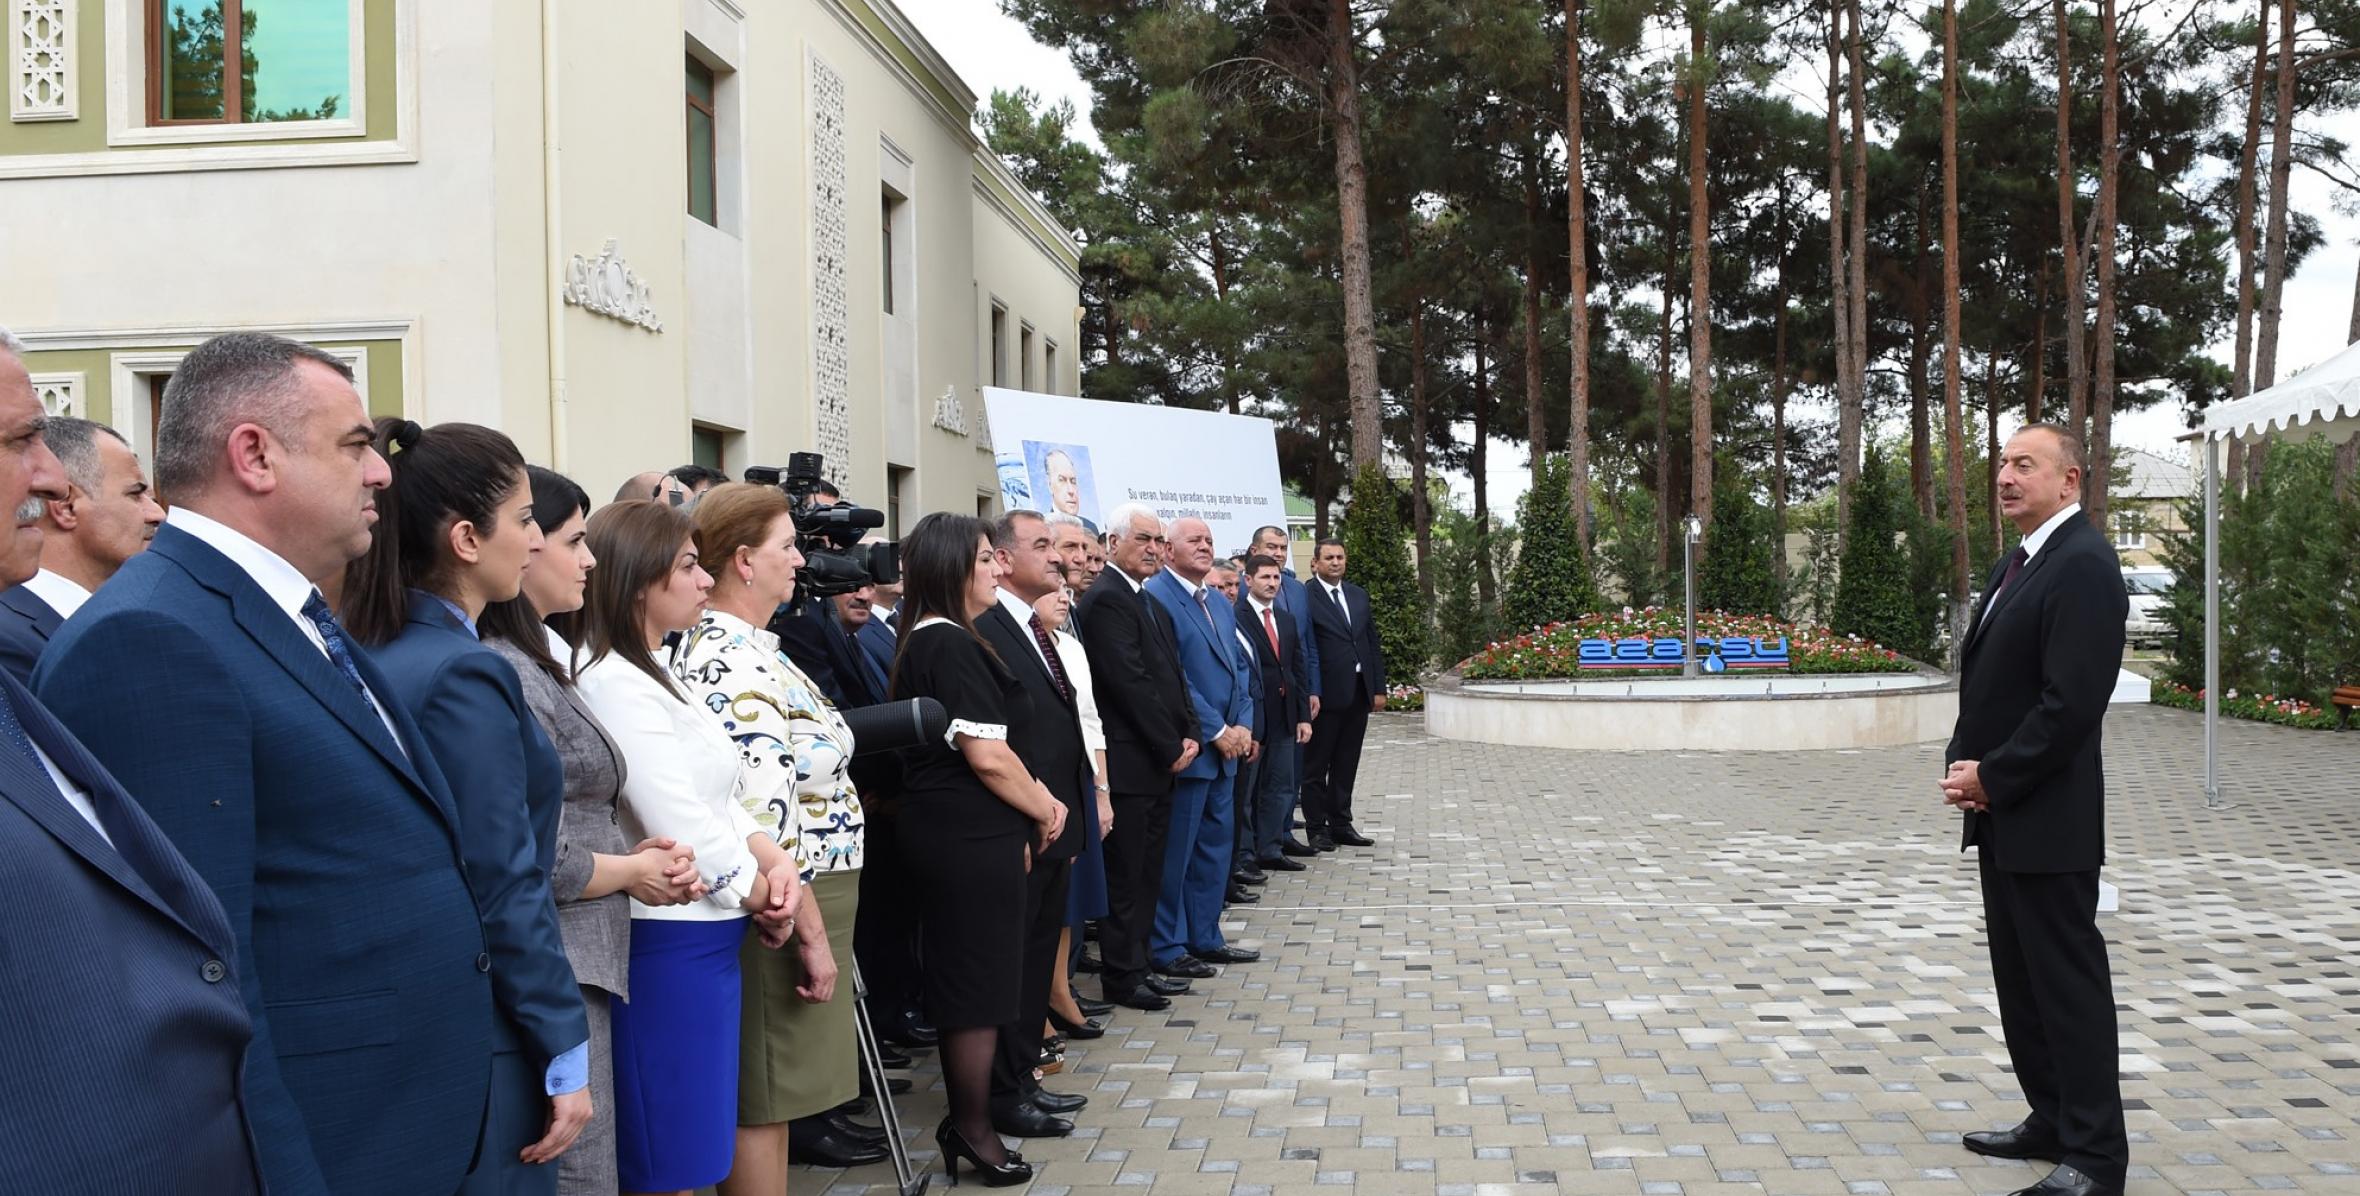 Speech by Ilham Aliyev at the opening of a new drinking water line in the city of Salyan